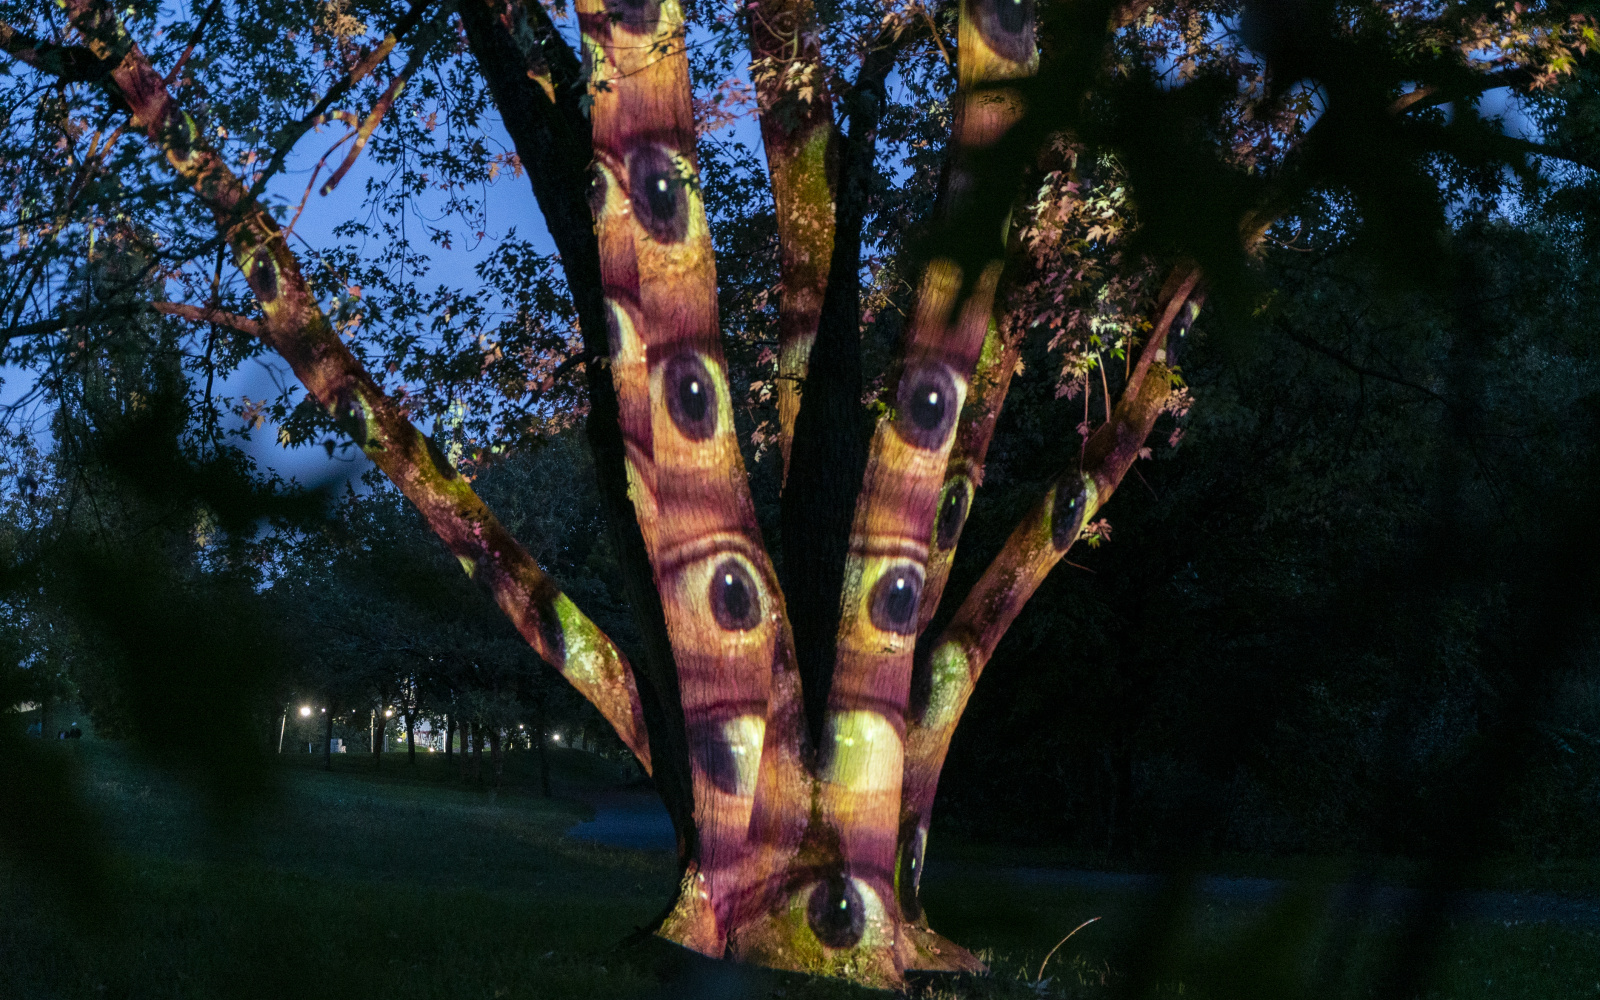 You can see a tree at night. Eyes are projected onto the tree trunk.